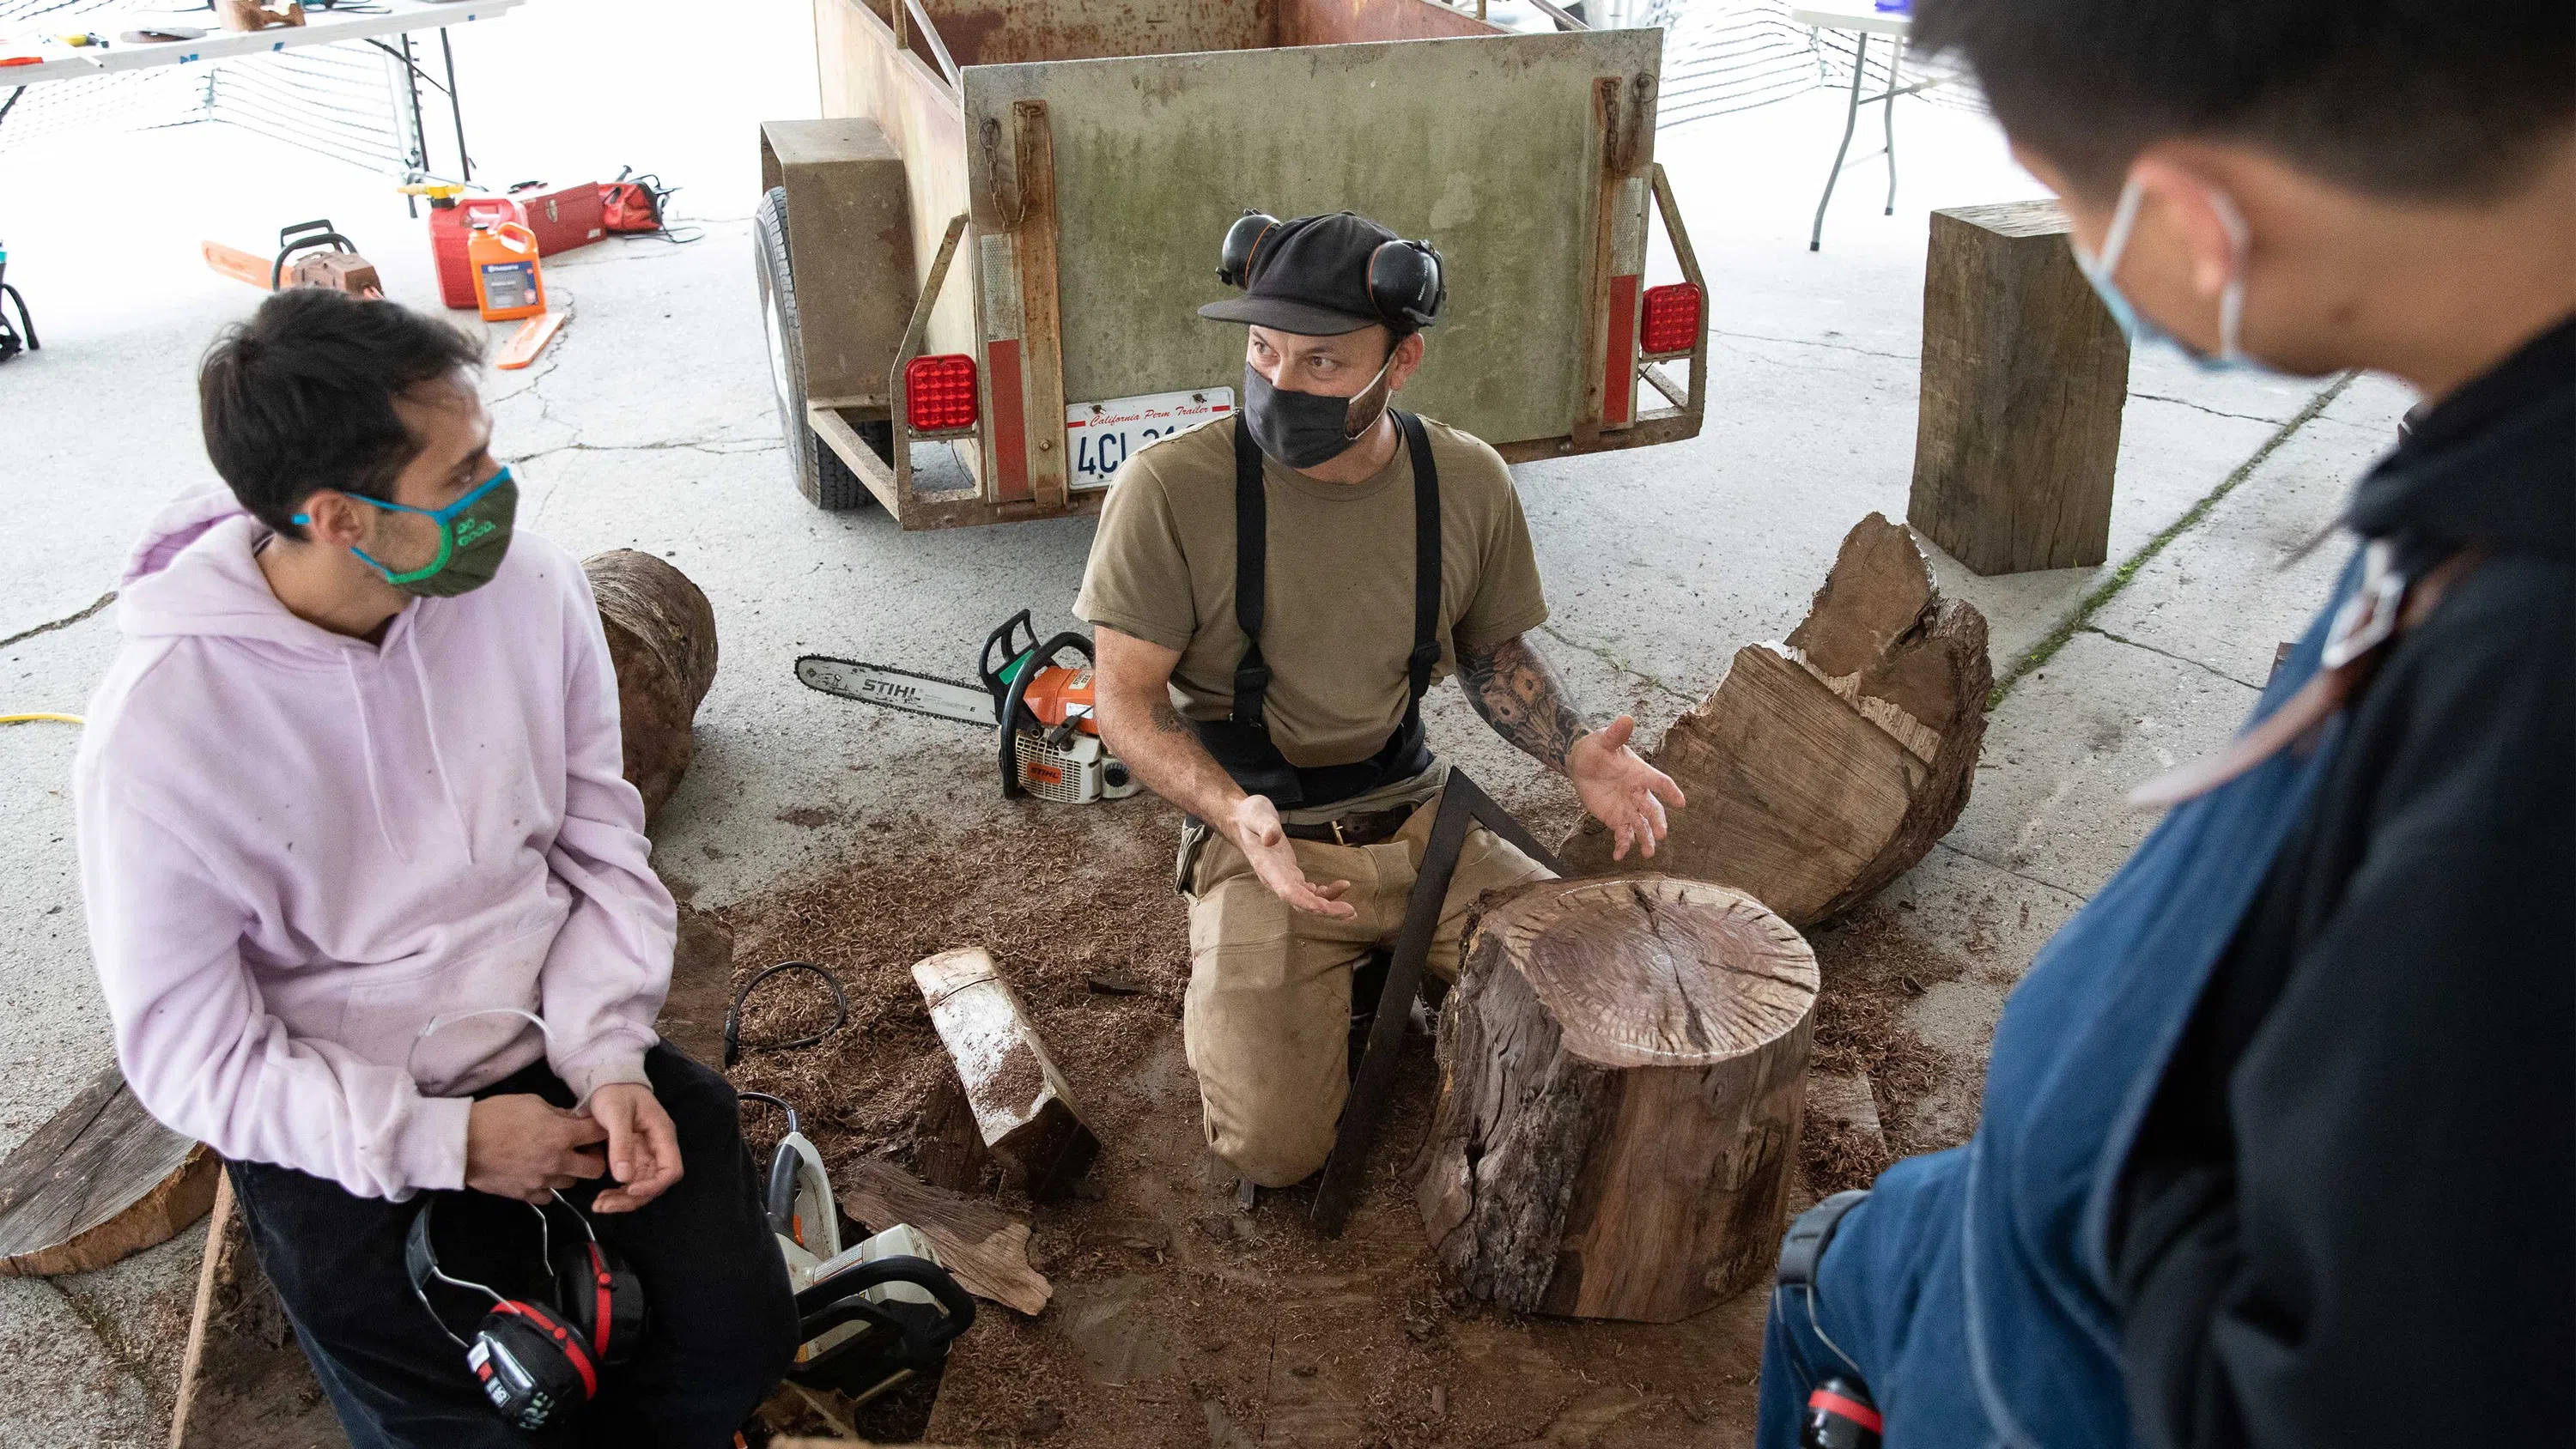 Ido Yoshimoto kneels to demonstrate chainsaw techniques on a wooden stump for two students on the Backlot.